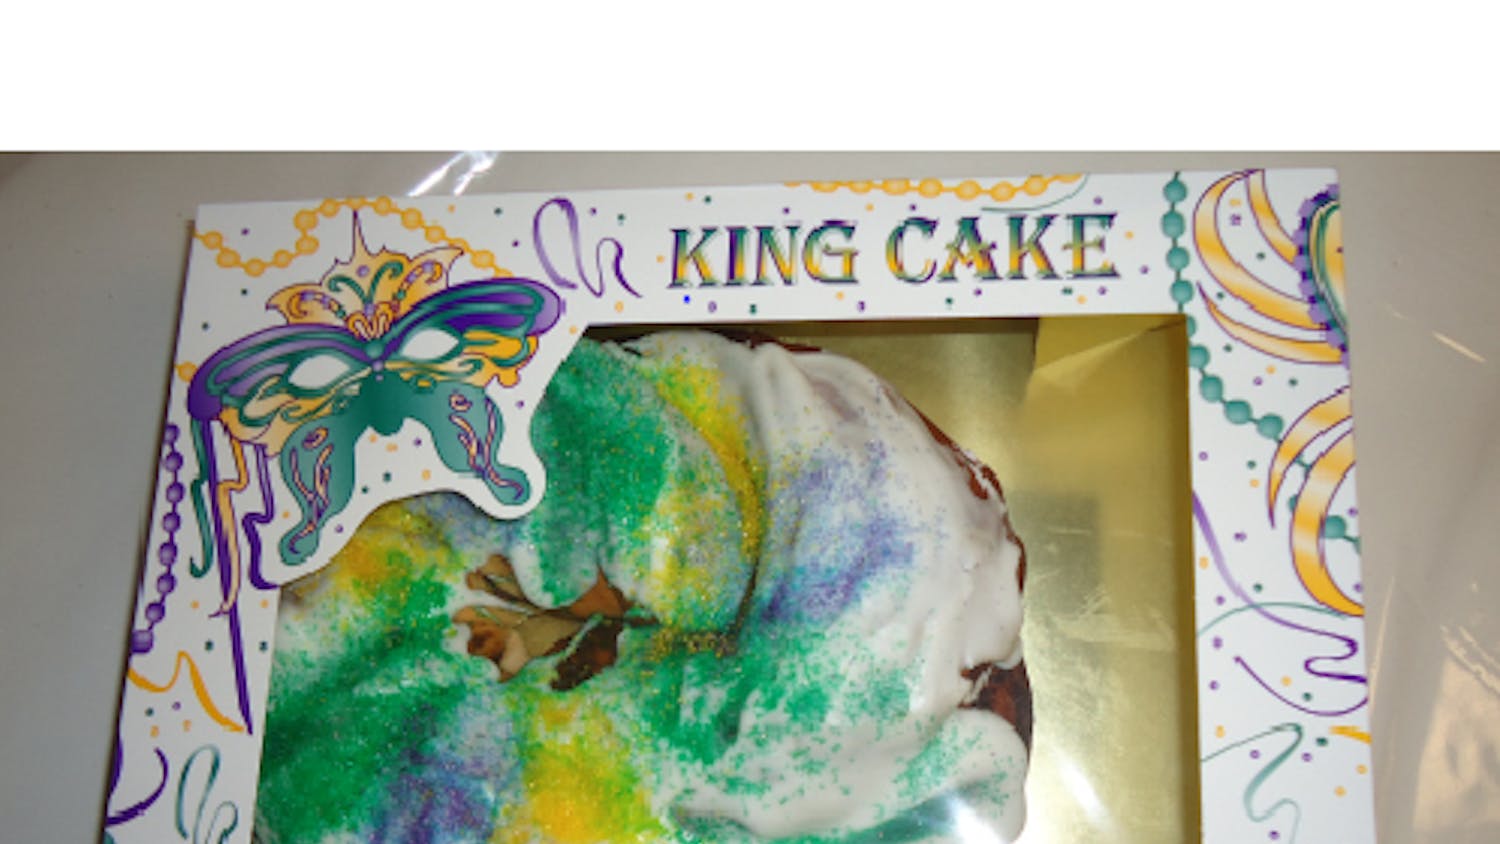 Head over to eateries like Bayou Bakery to get a traditional king cake.